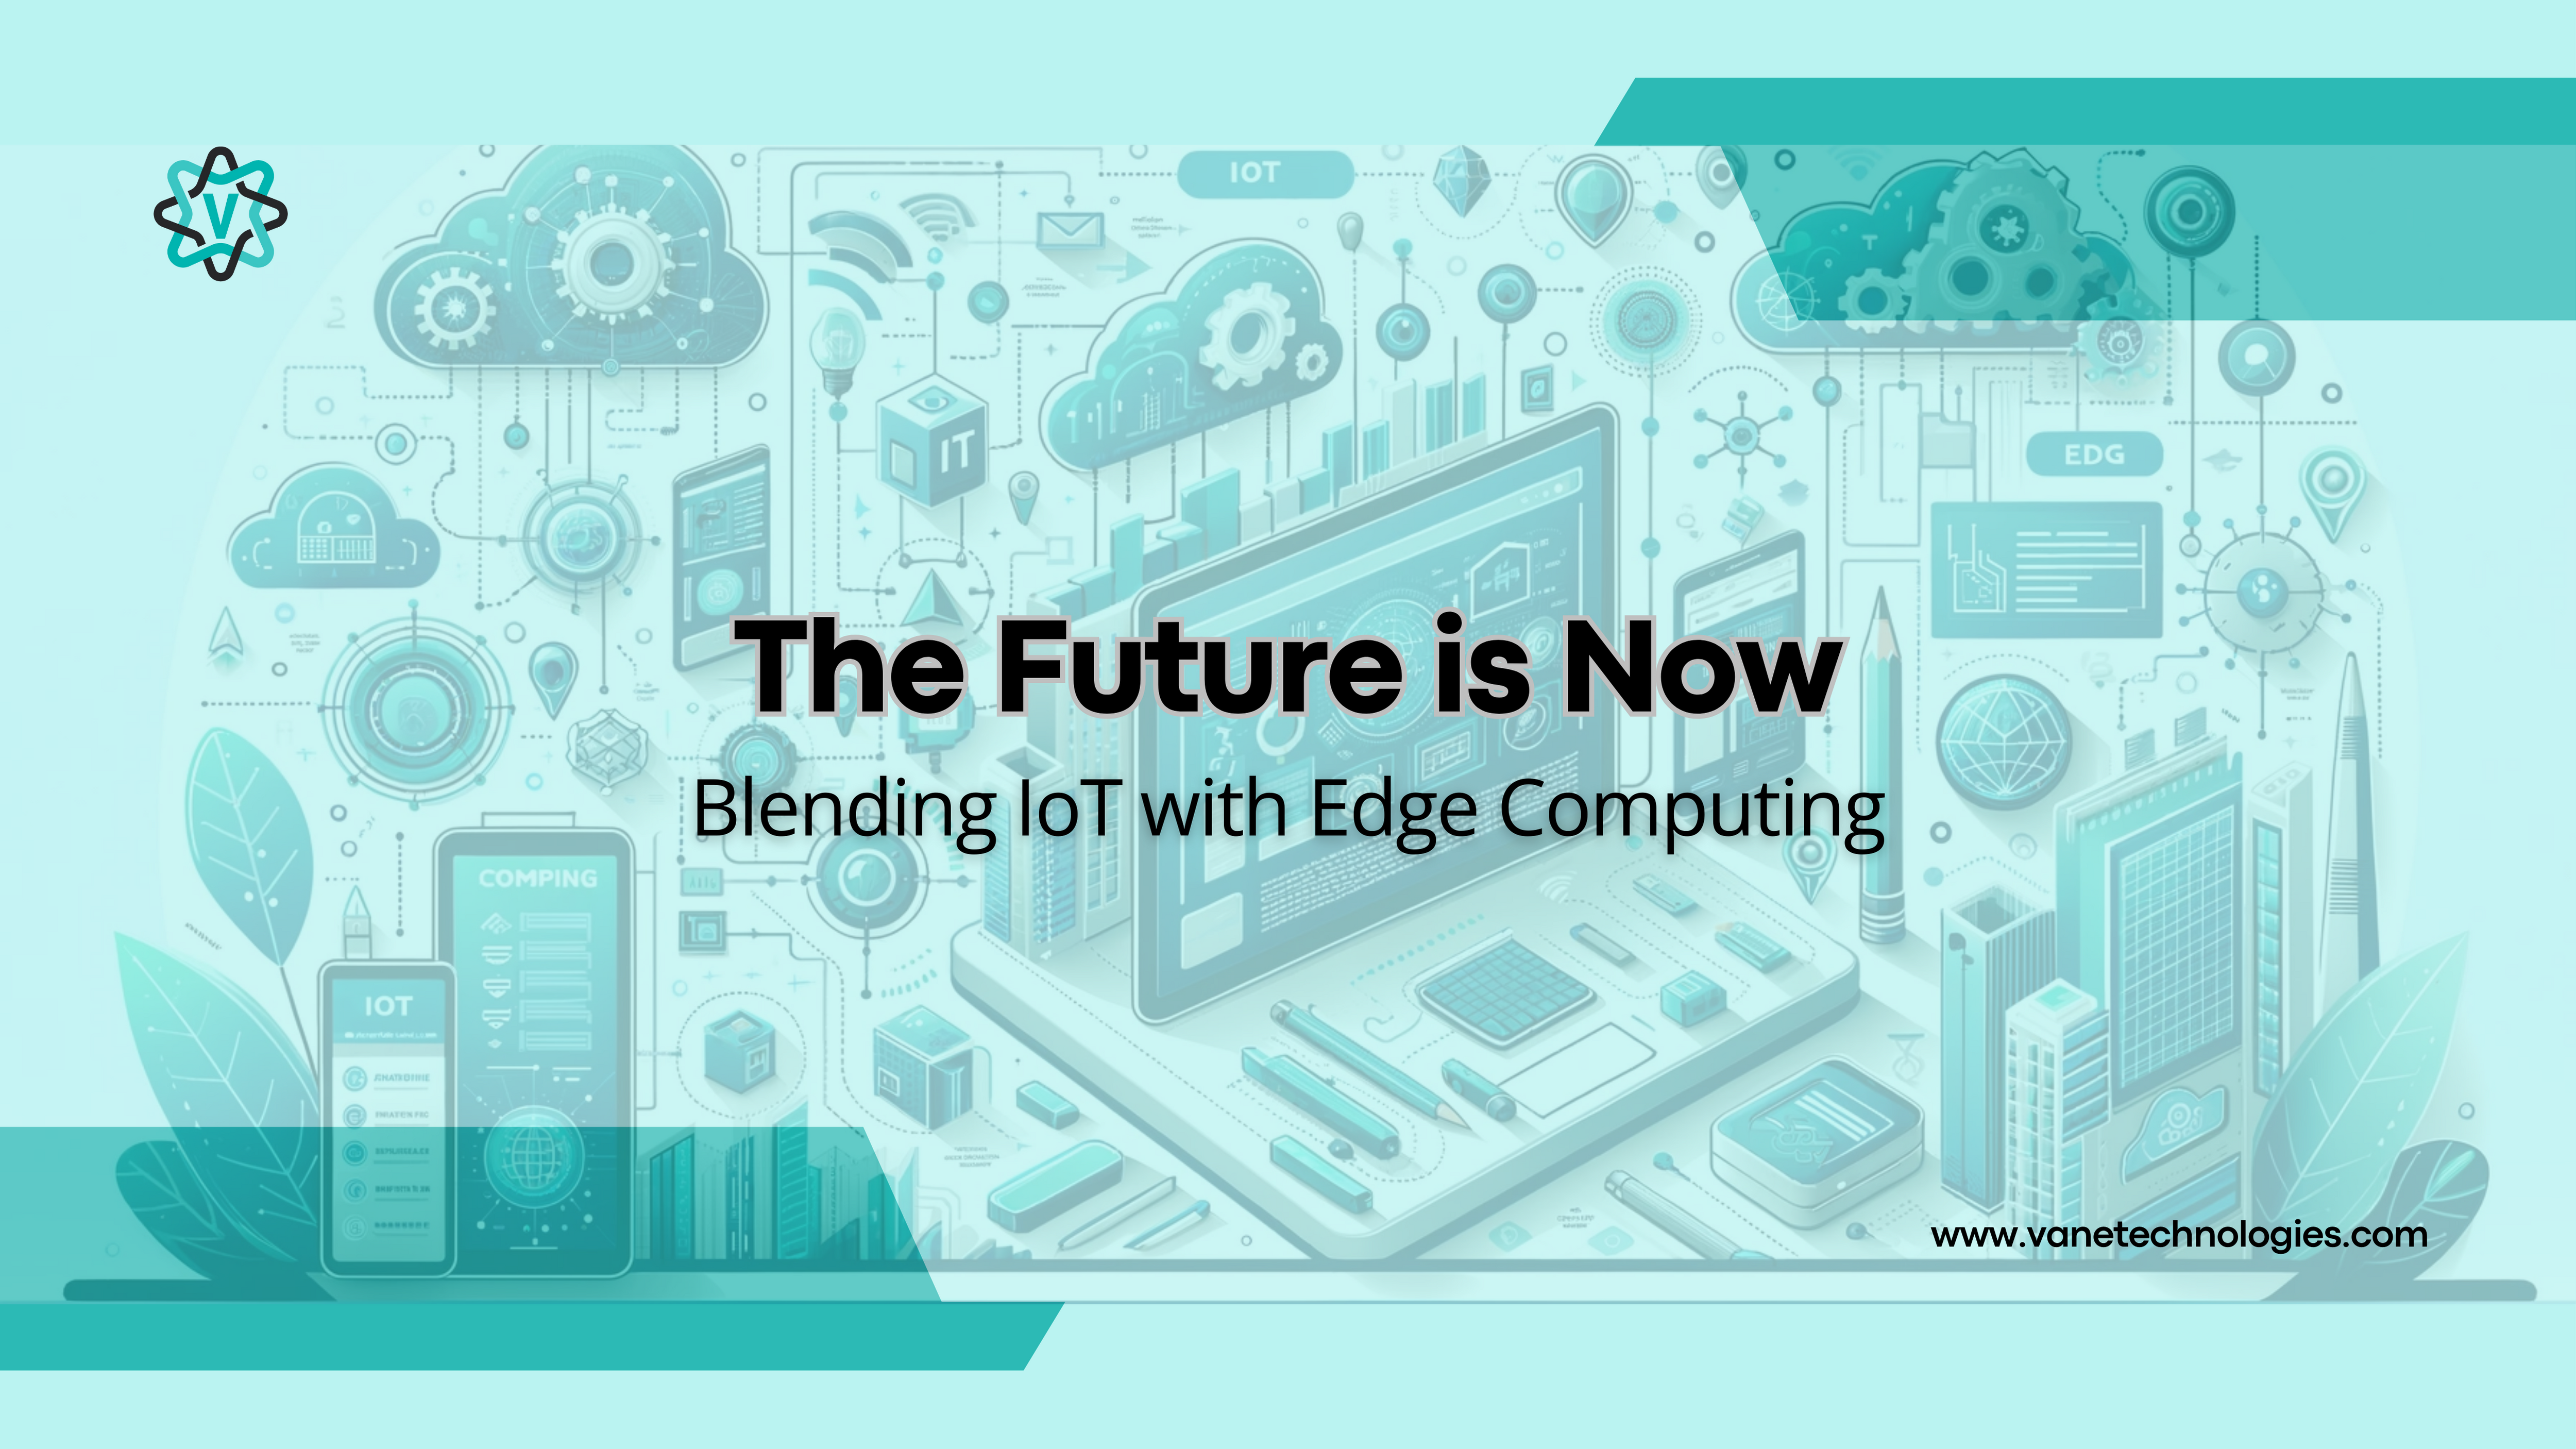 The Future is Now: Blending IoT with Edge Computing